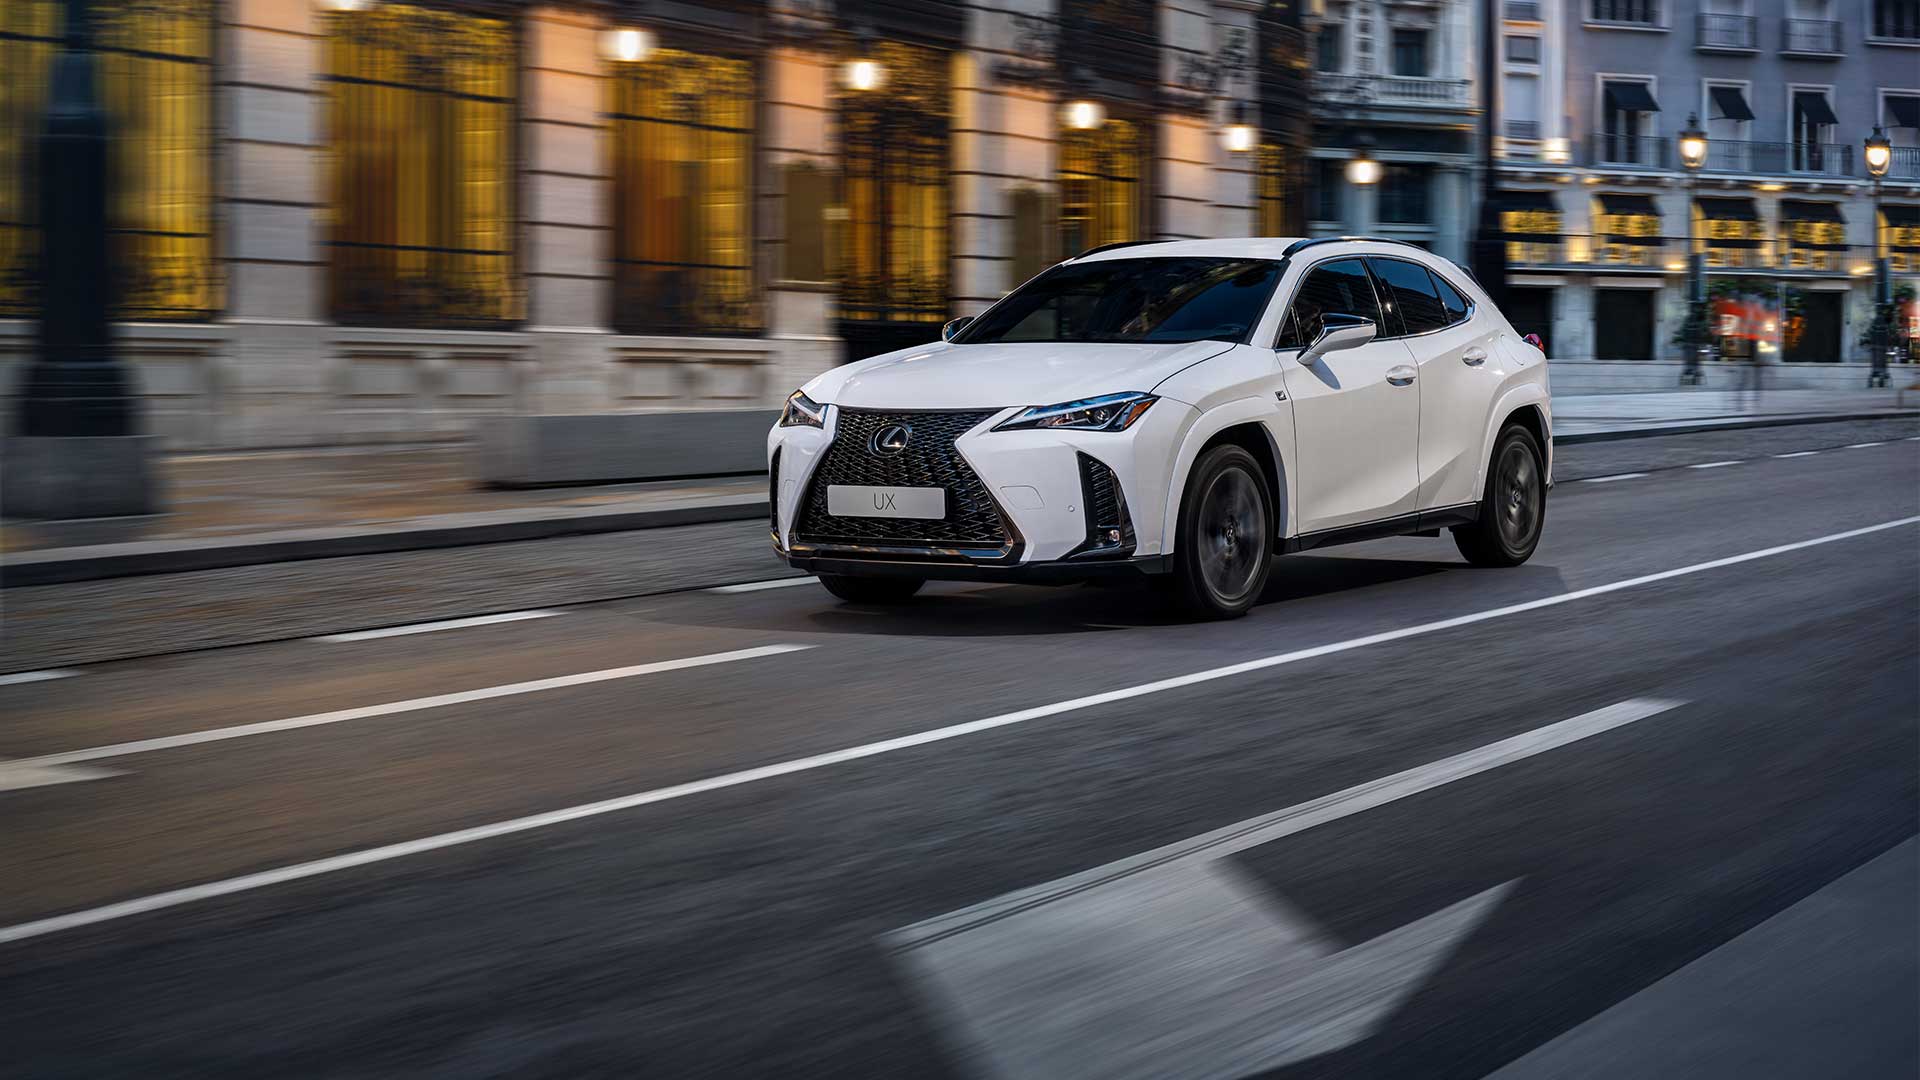 A white 2022 Lexus UX drives down a city street lined with heritage buildings